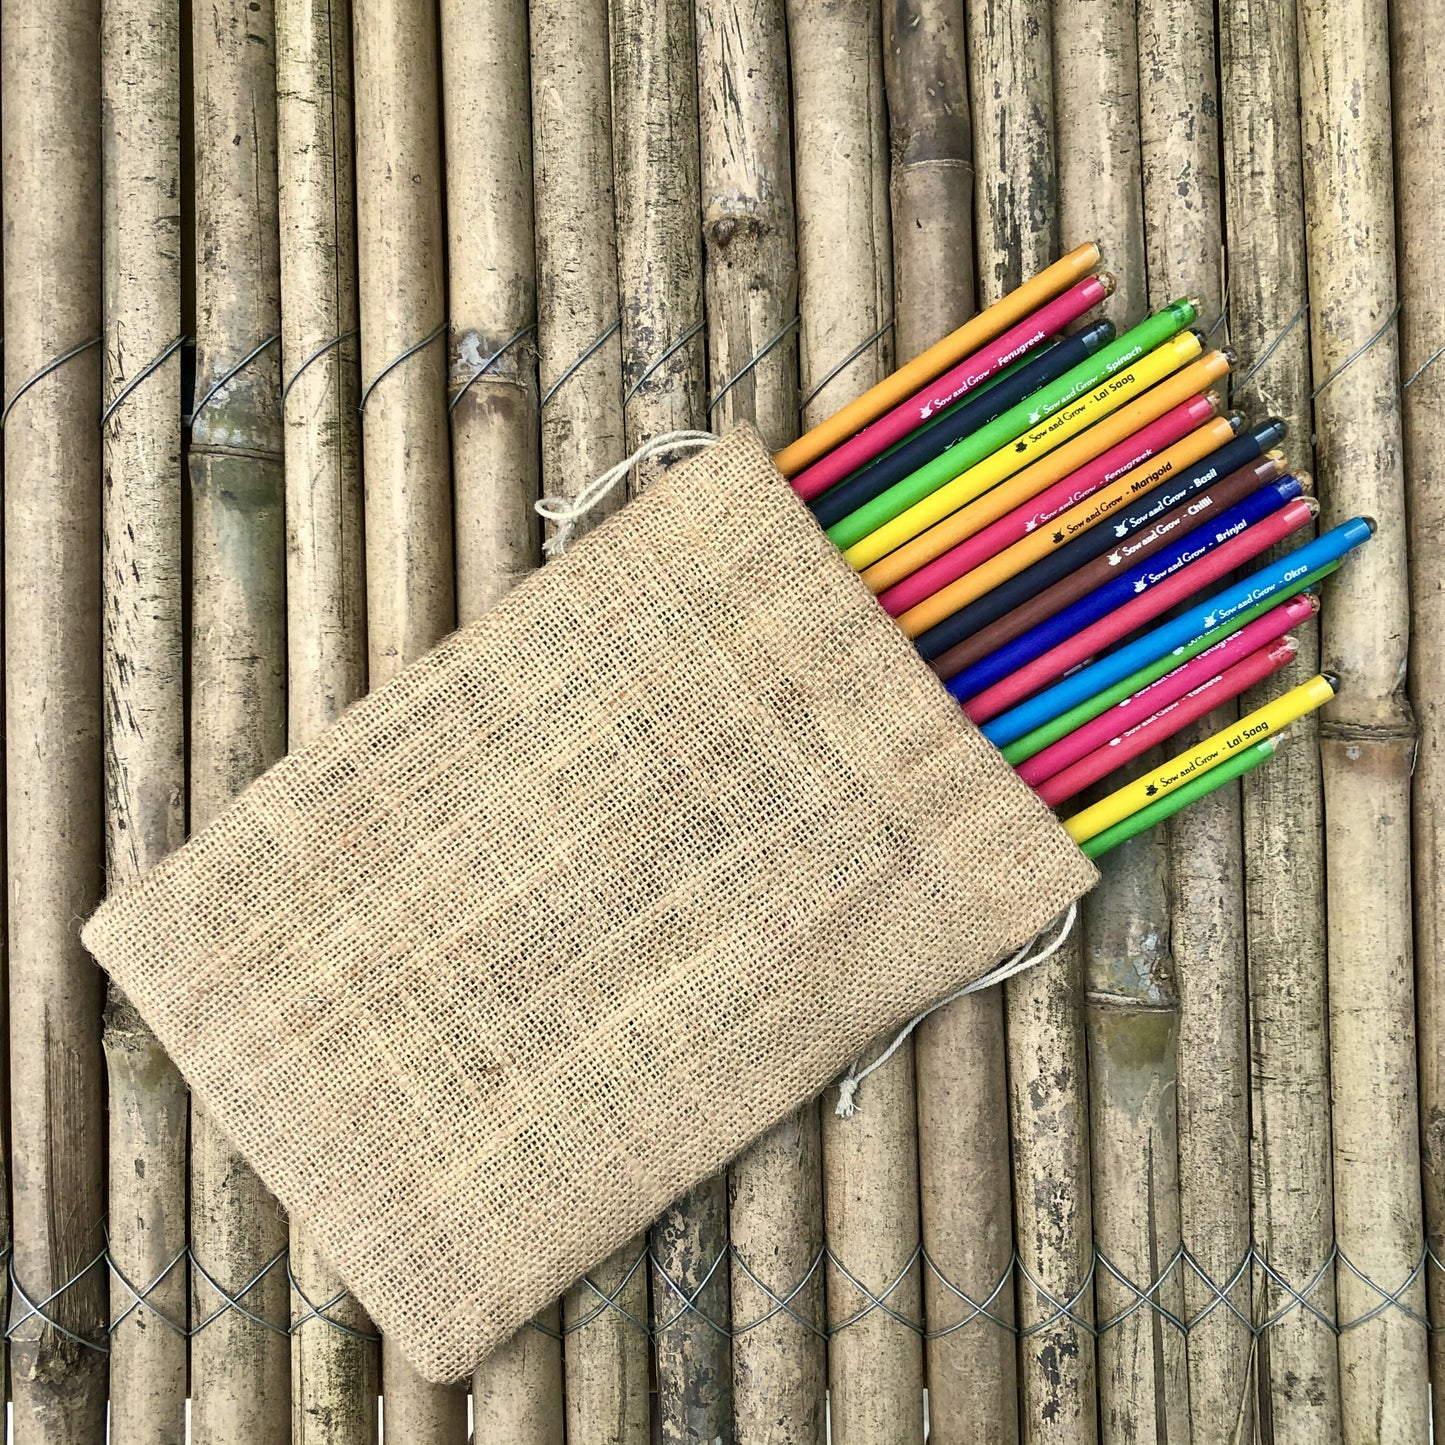 Plantable Seed Pencils with Jute Packaging (Pack of 50)